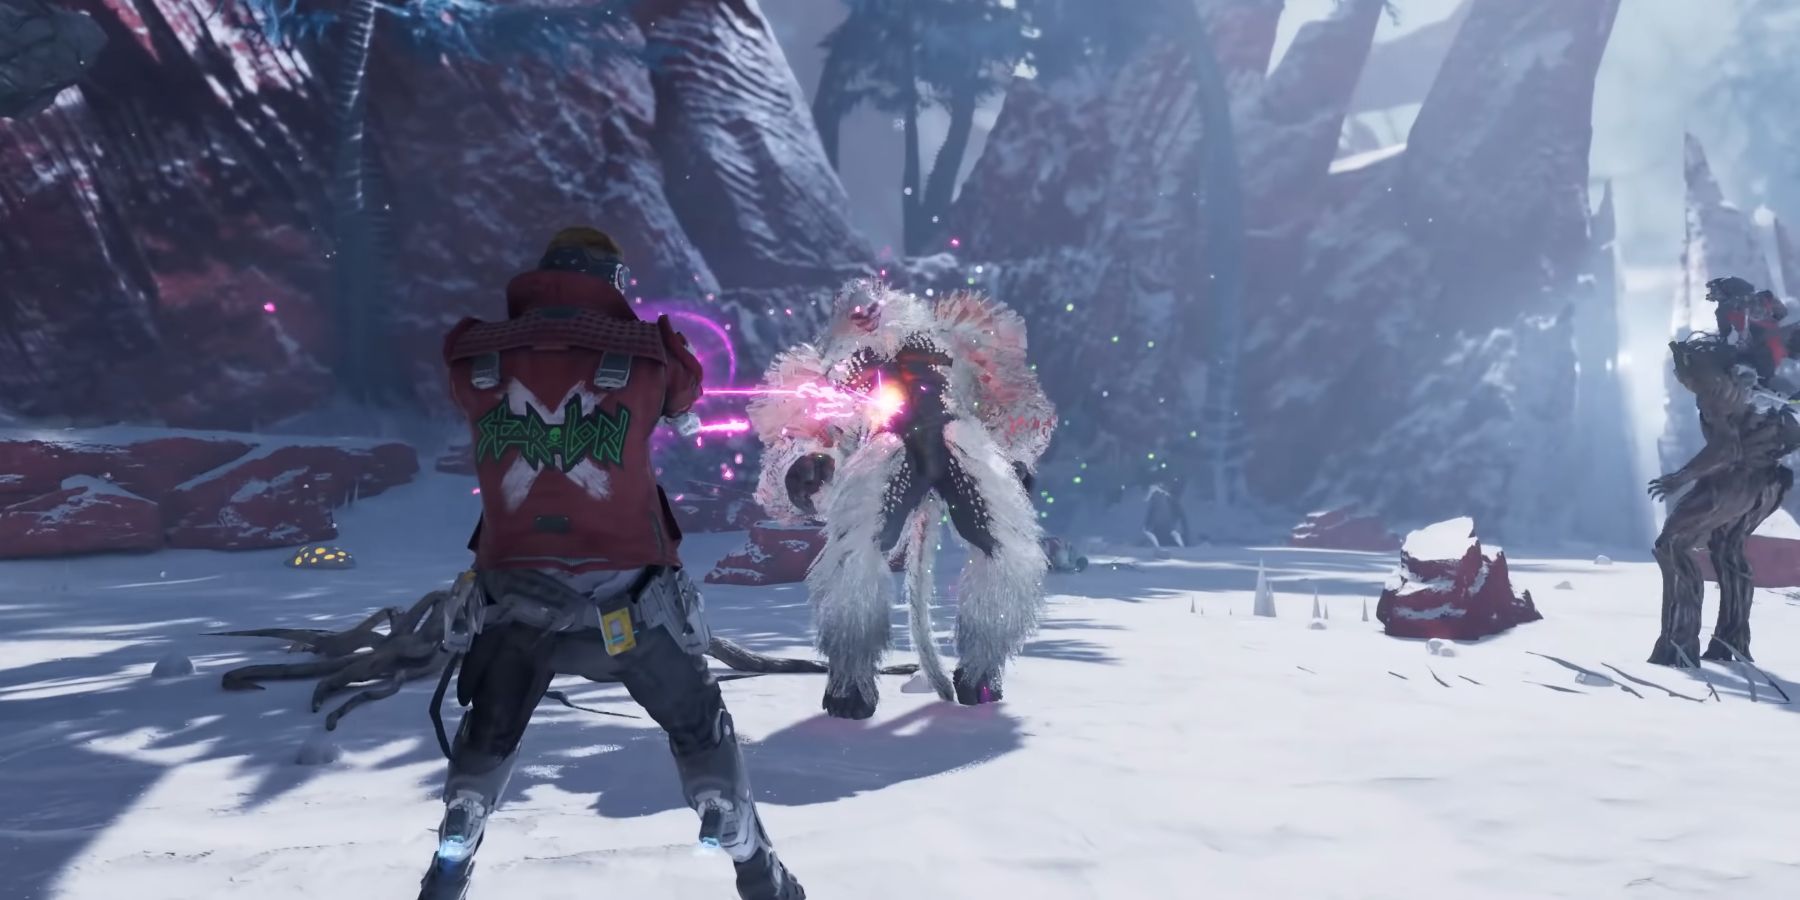 Star-Lord and Groot battling a snow monster in Marvel’s Guardians of the Galaxy